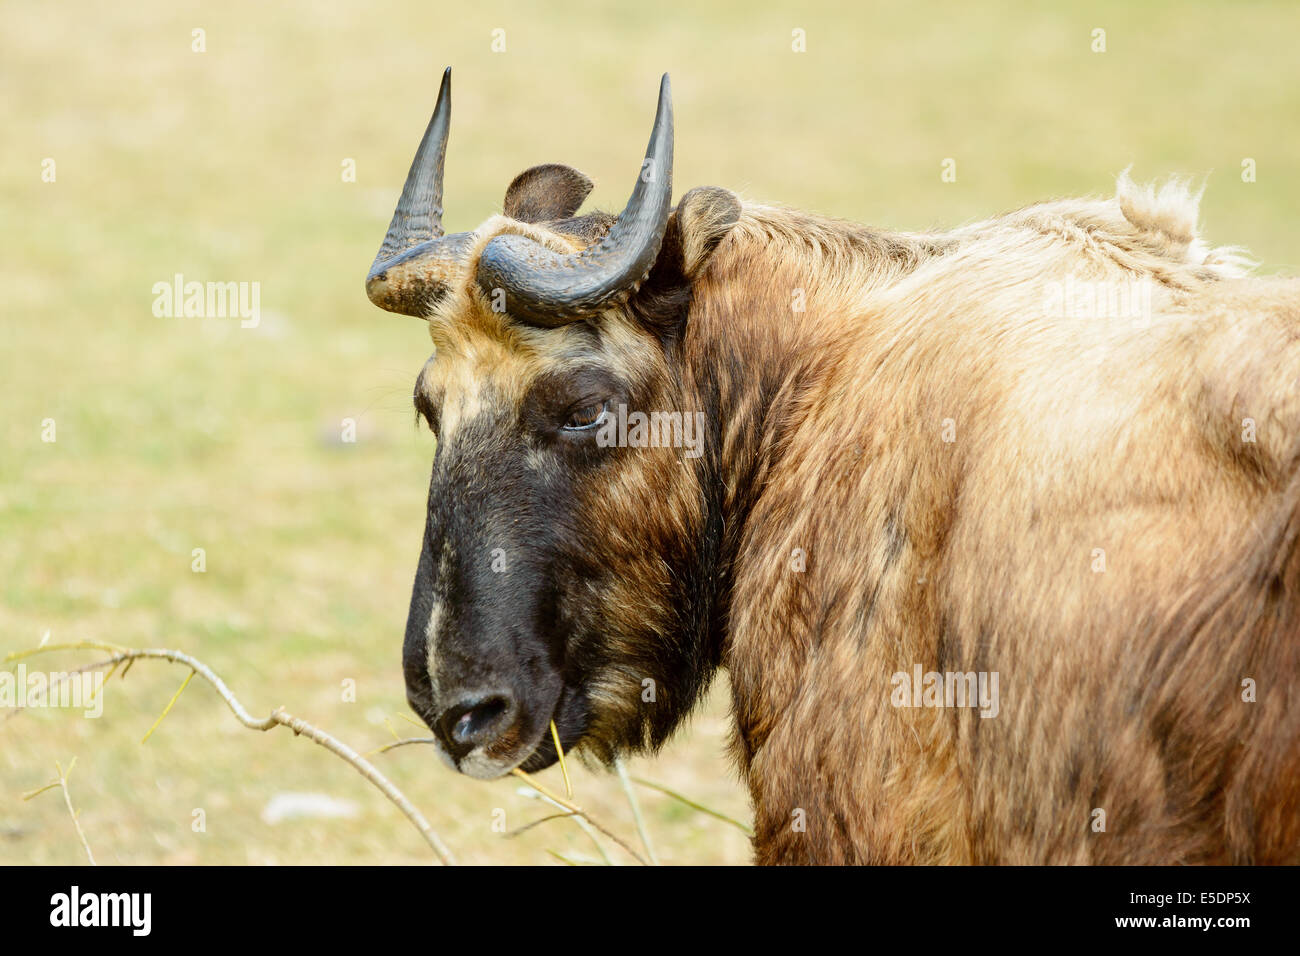 Takin, Budorcas taxicolor, here seen eating on branch or twig. Also known as cattle chamois or gnu goat, Stock Photo